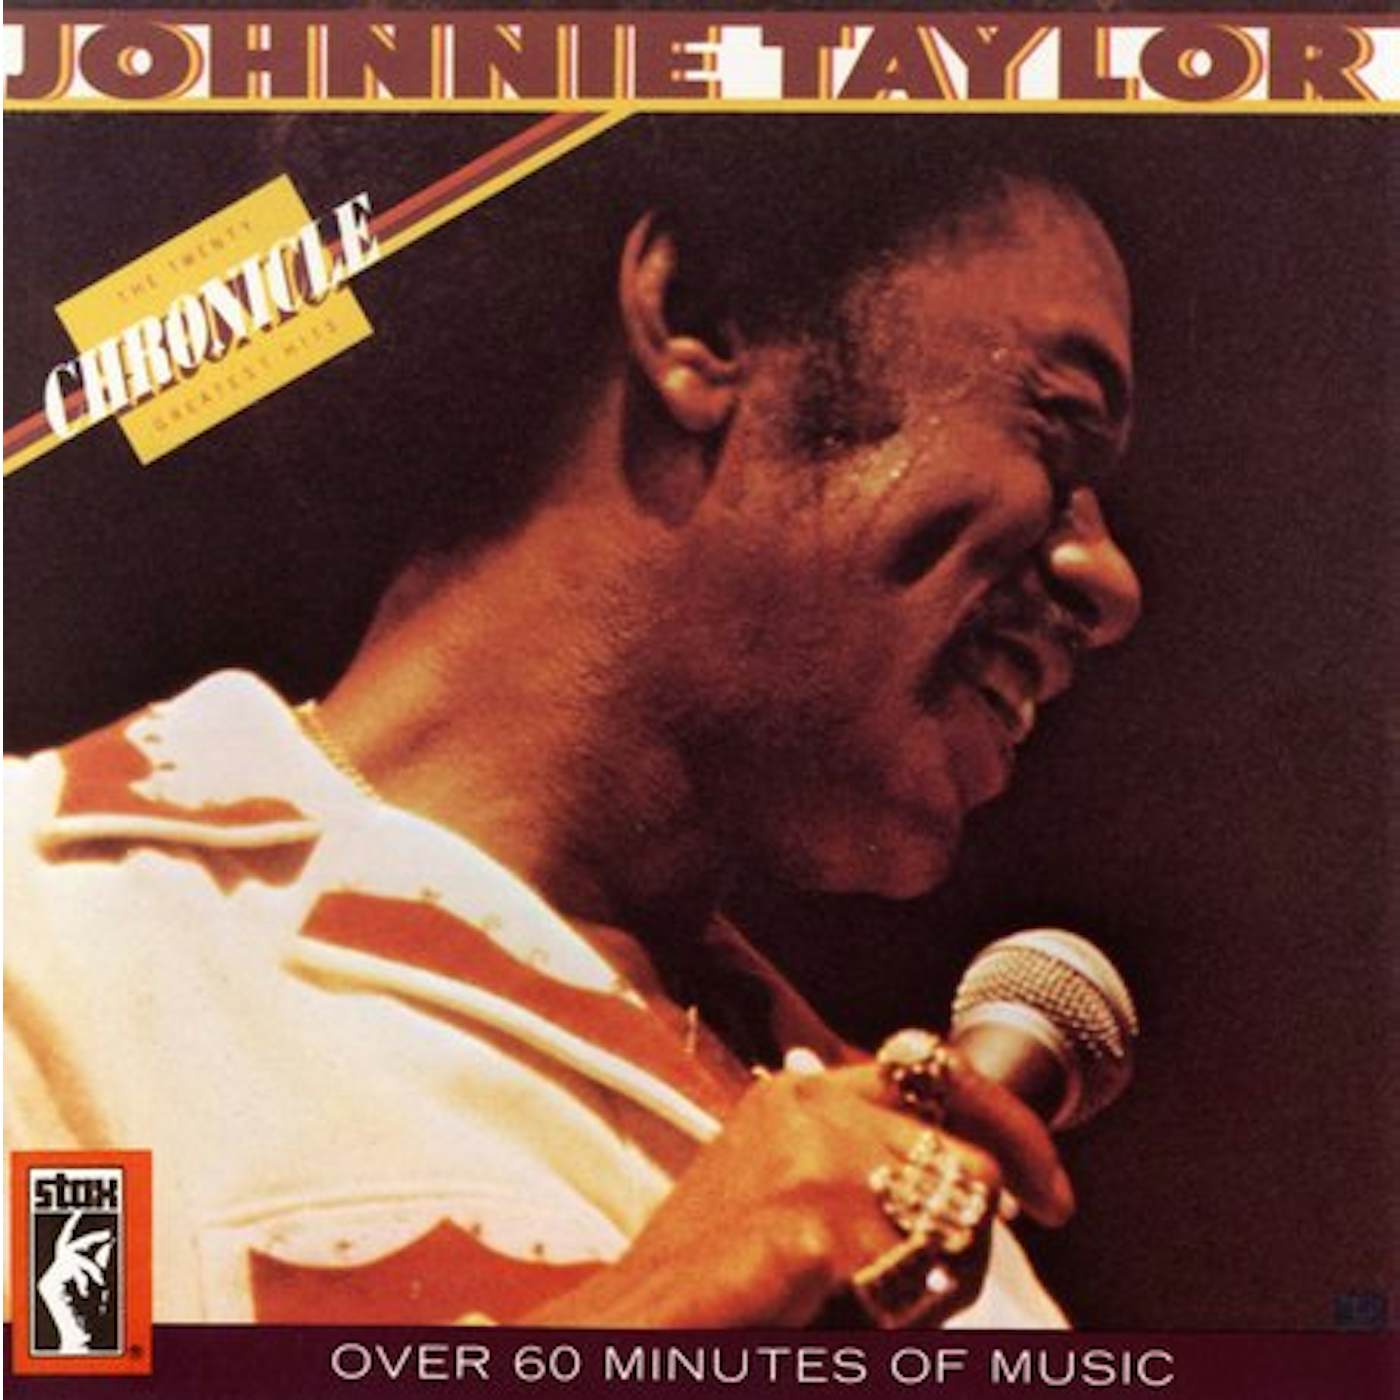 Johnnie Taylor CHRONICLE: 20 GREATEST HITS CD